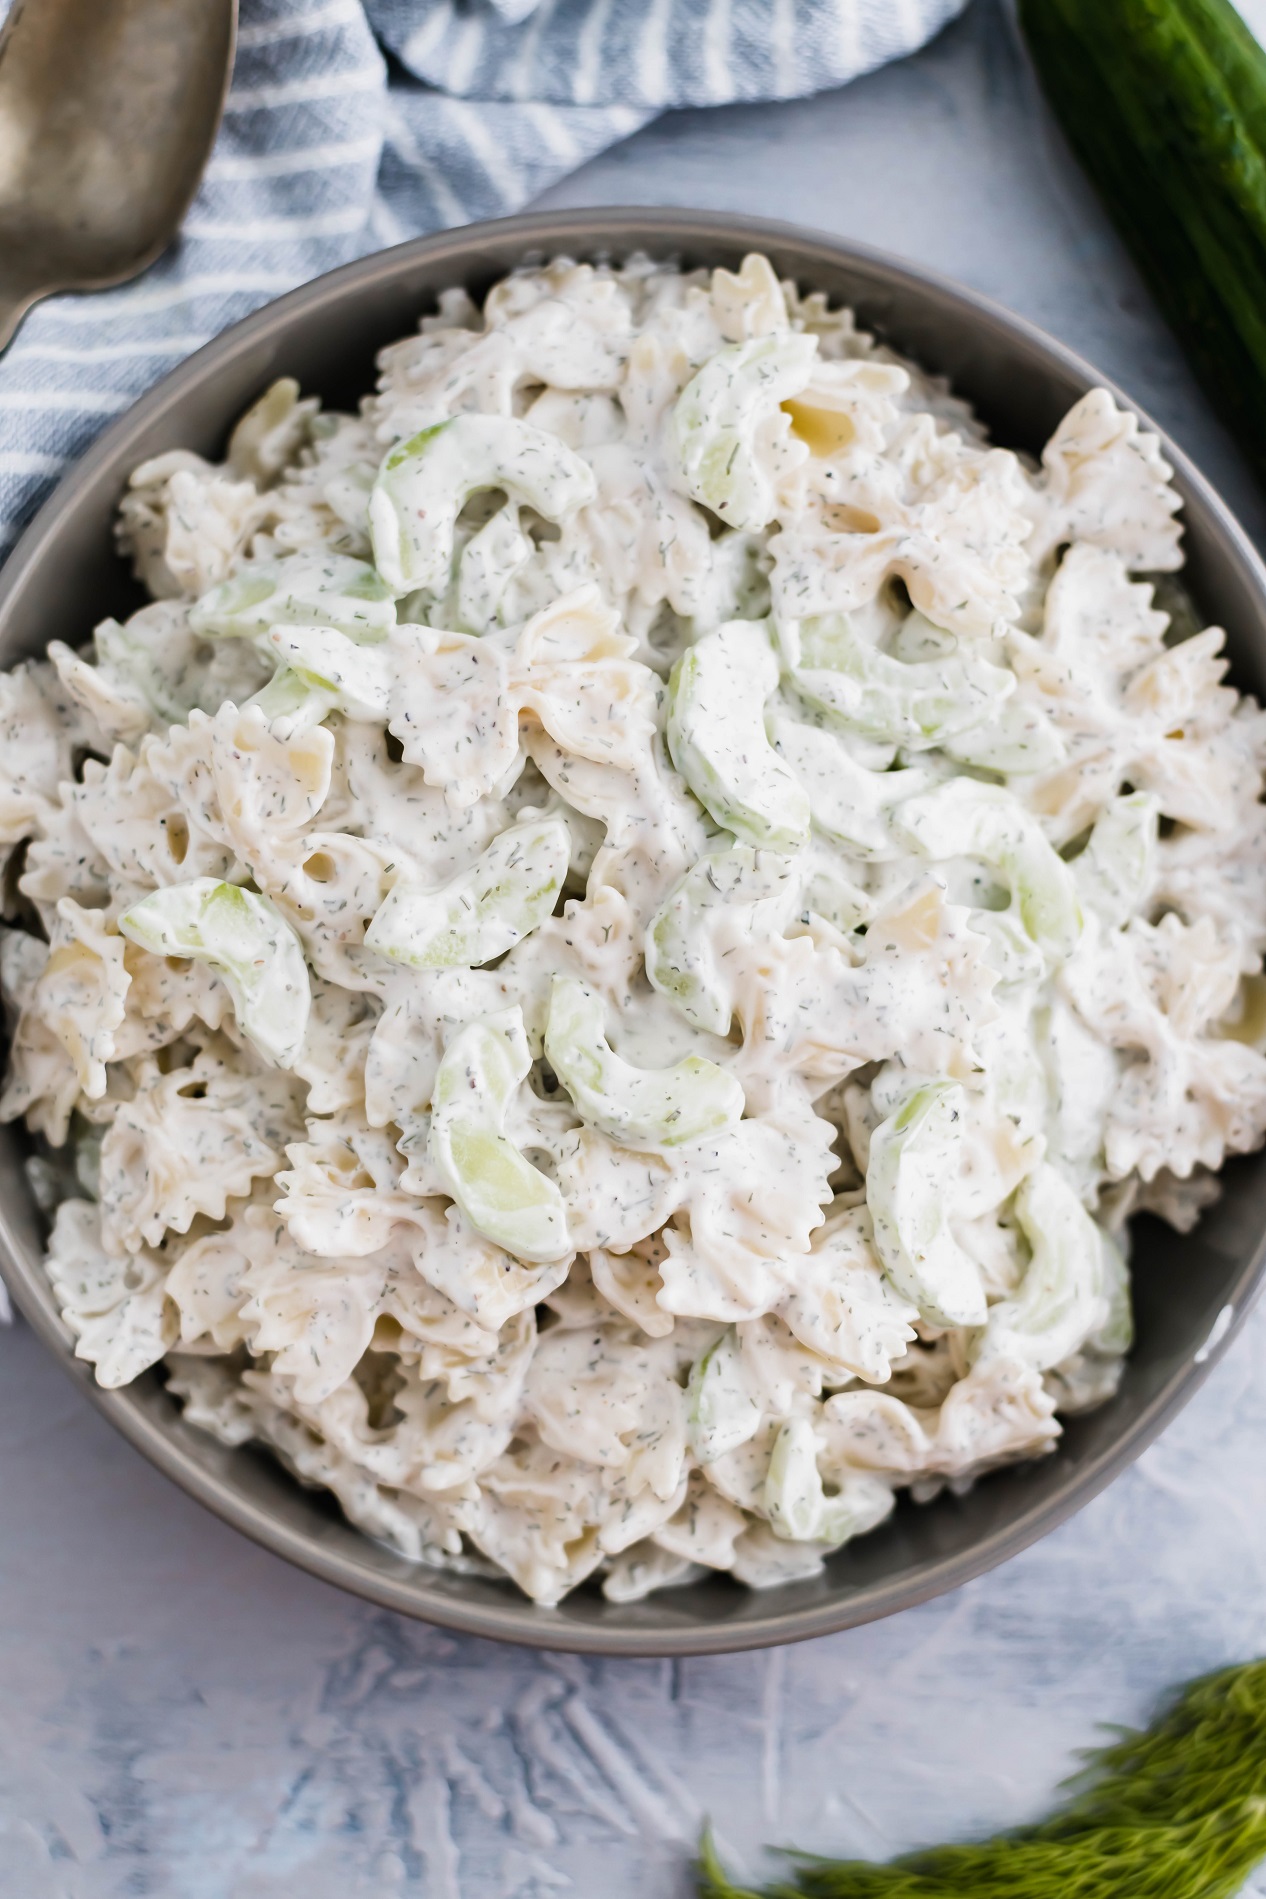 Two delicious summer salads combine to create this creamy Cucumber Pasta Salad. The perfect side dish for all your summer barbecues.